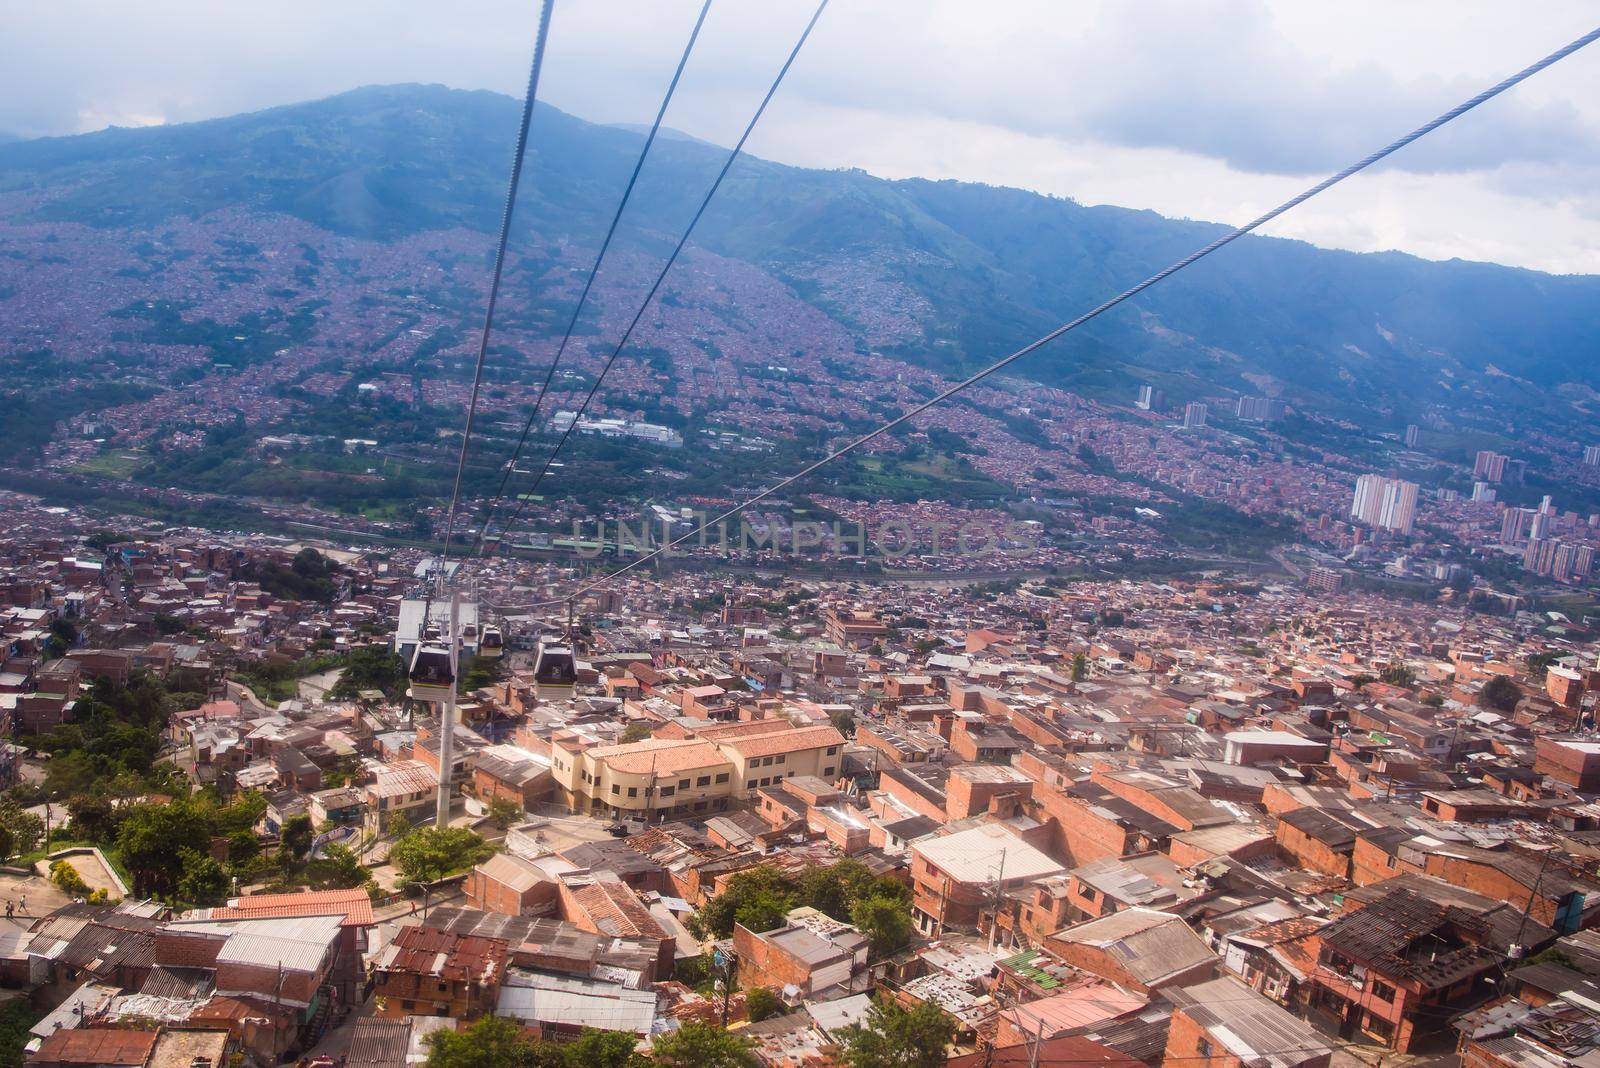 Cable car route over many red roof homes by jyurinko